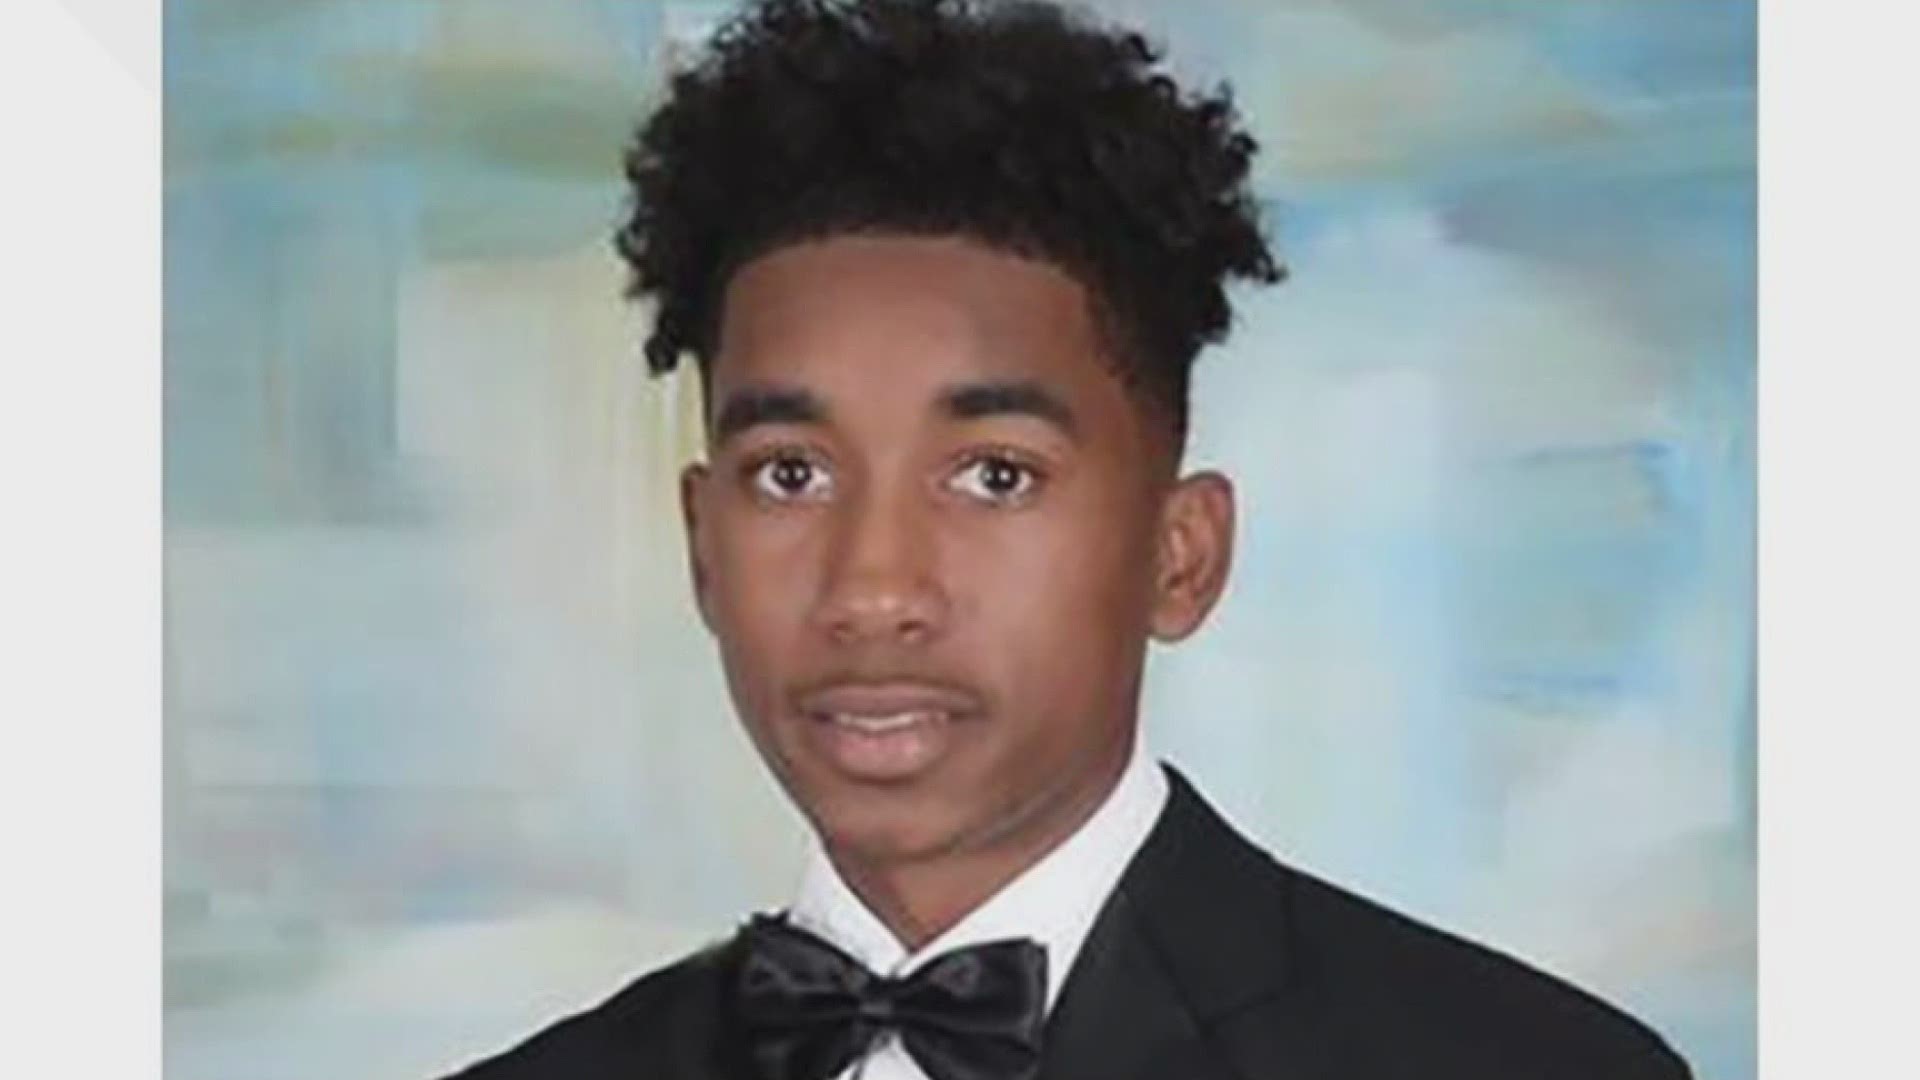 The death of a New Orleans high school senior hits a school community hard and shines an even brighter light on an ongoing problem in the city.